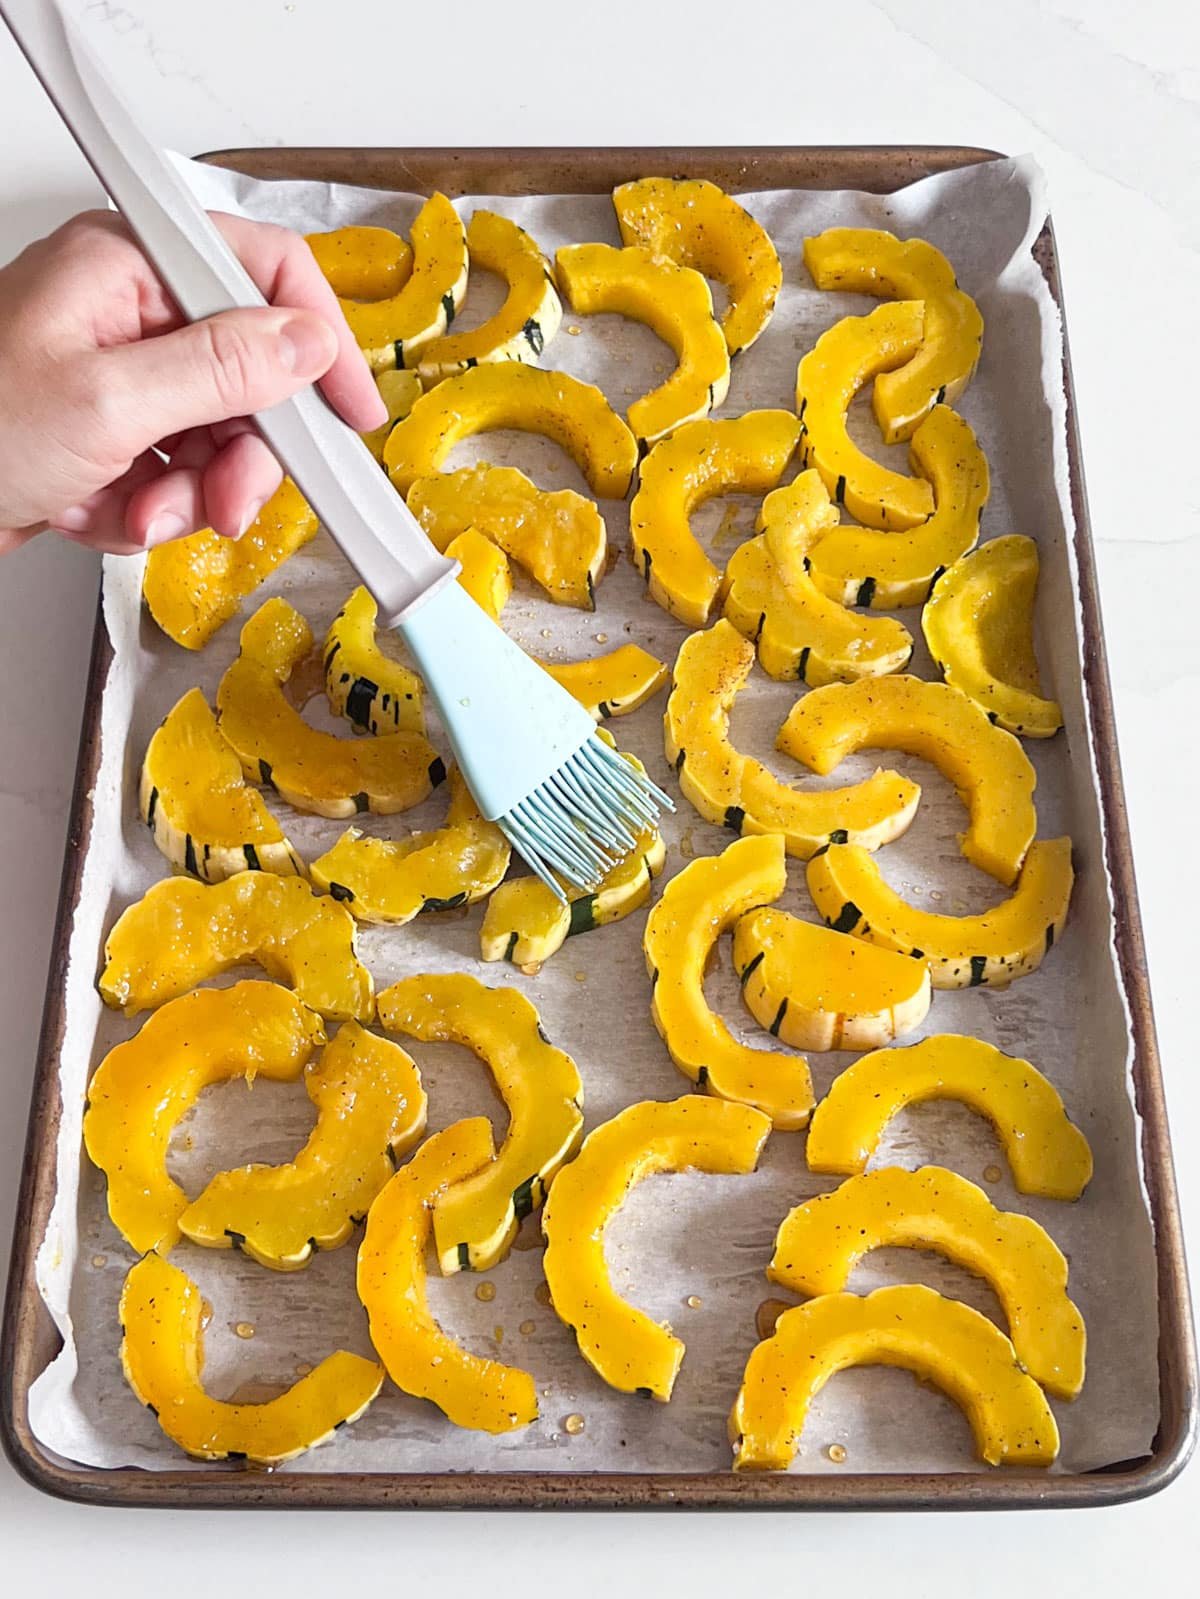 A hand brushing hones on slices of delicata squash on a parchment-lined pan.